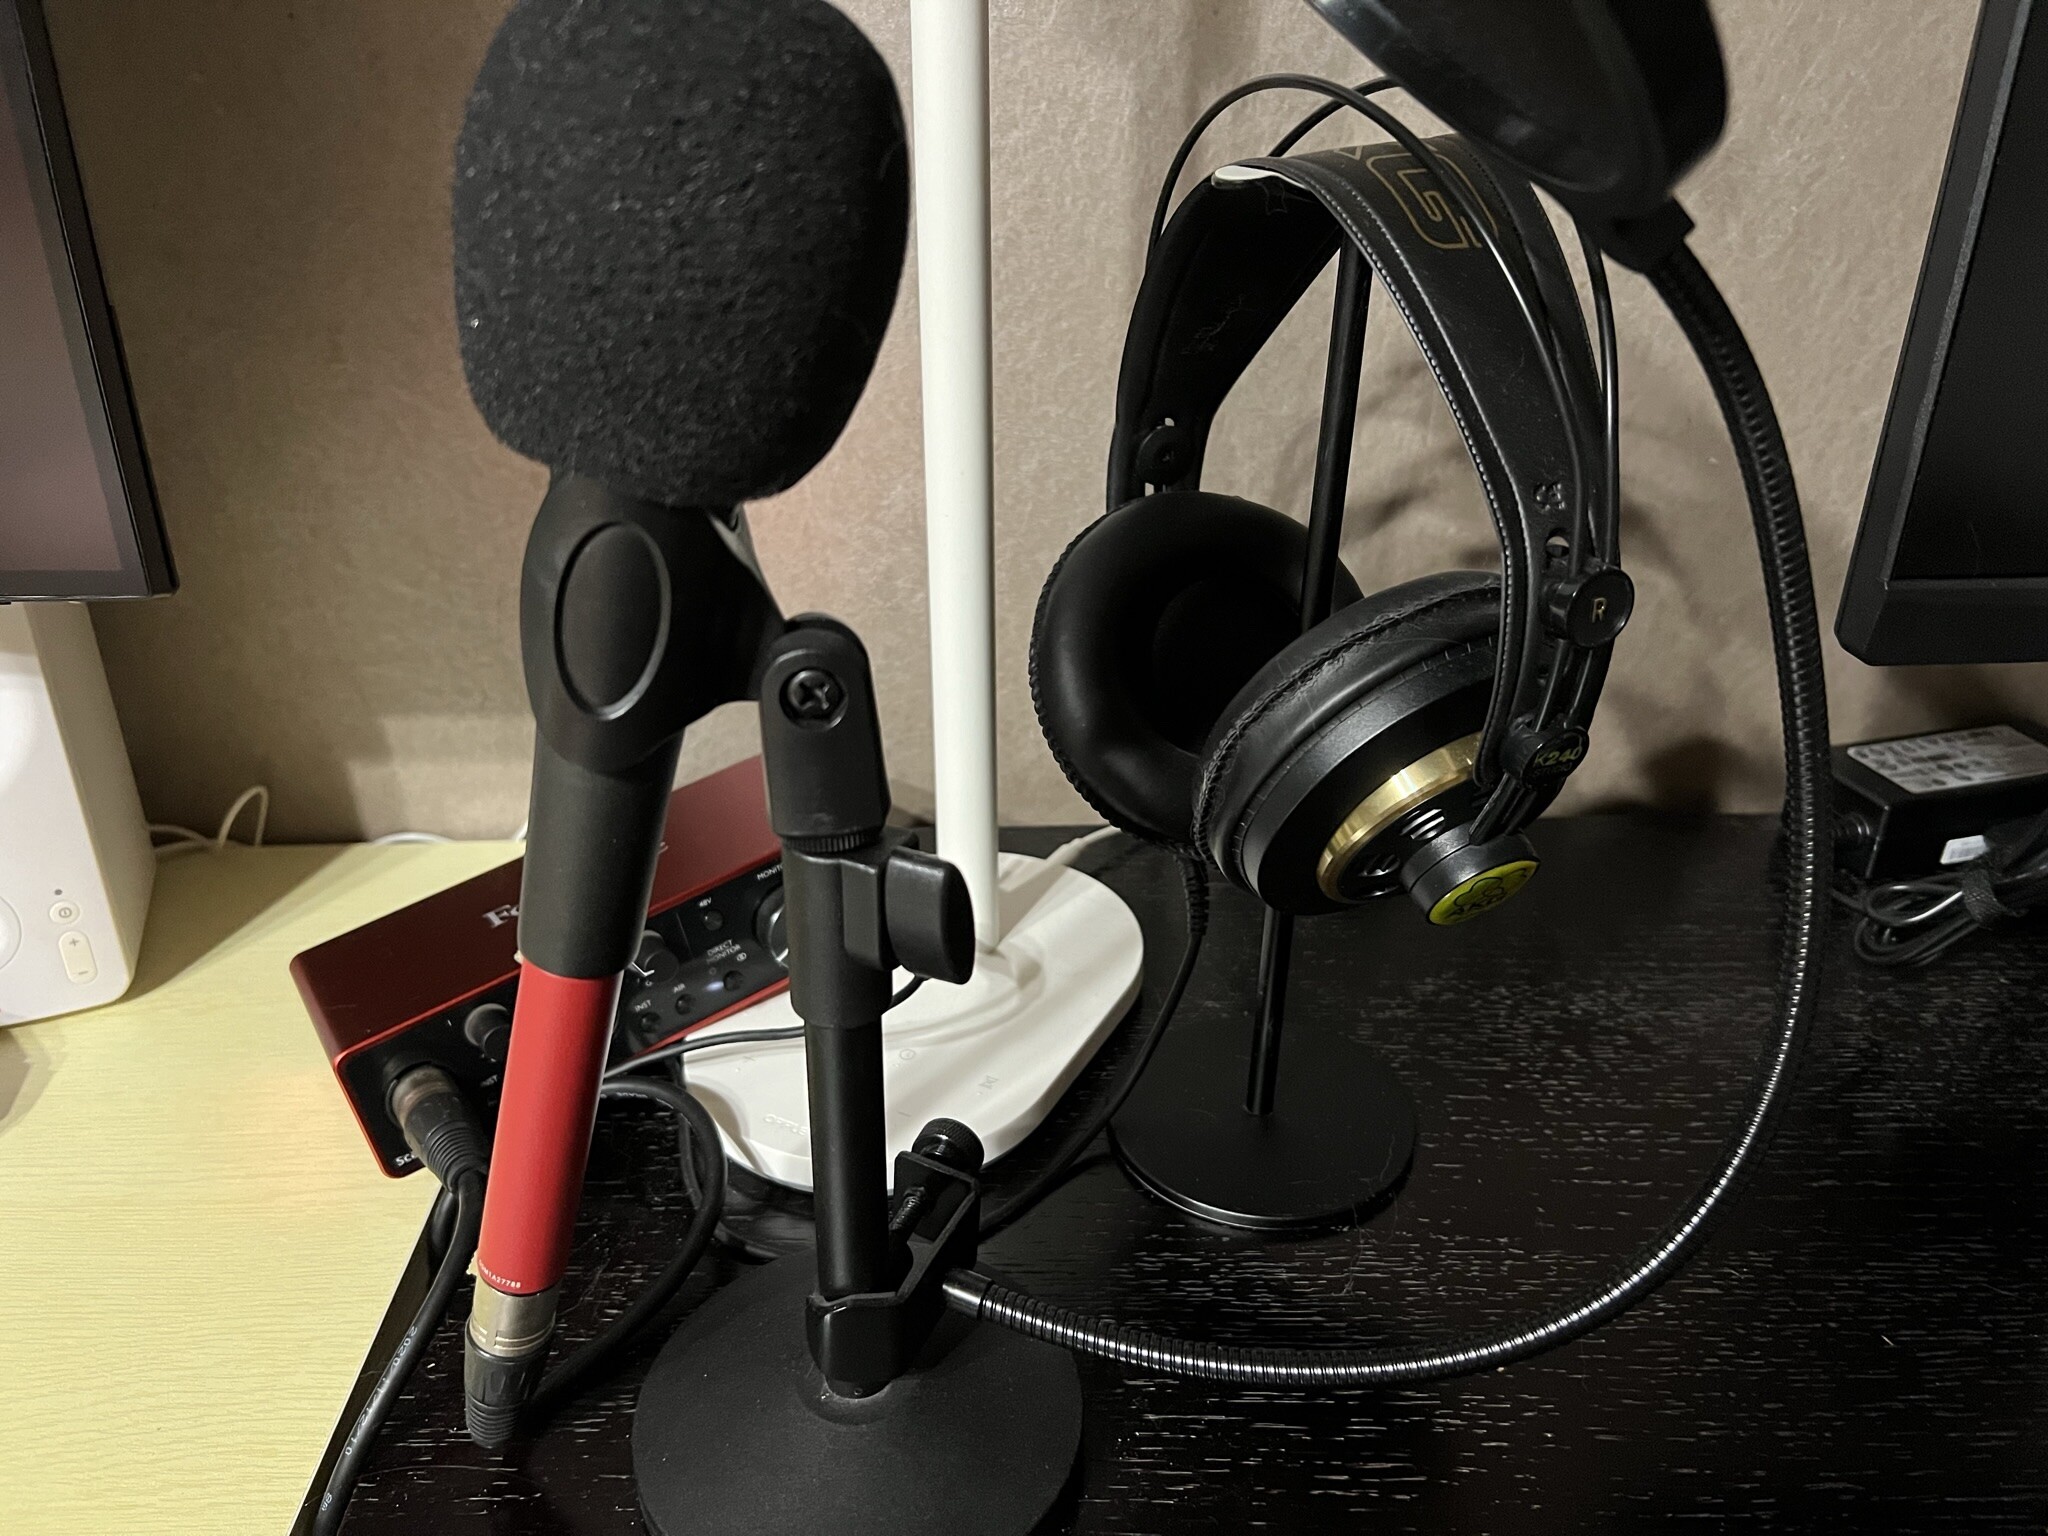 Podcast toolkit